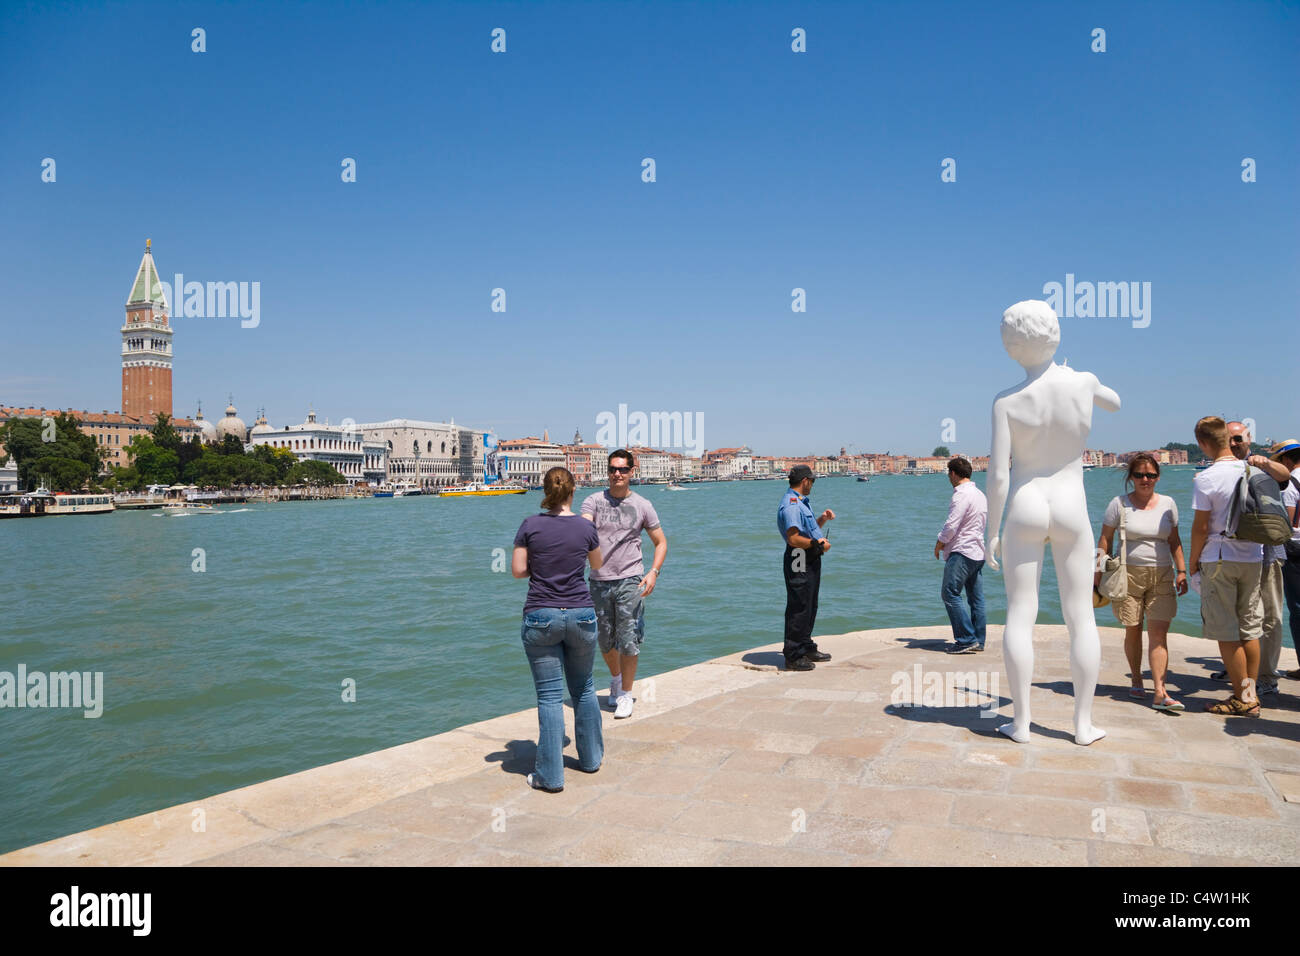 Punta della Dogana with Charles Ray's sculpture Boy with Frog against view of Venice with Giardini ex Reali, Venice, Italy Stock Photo